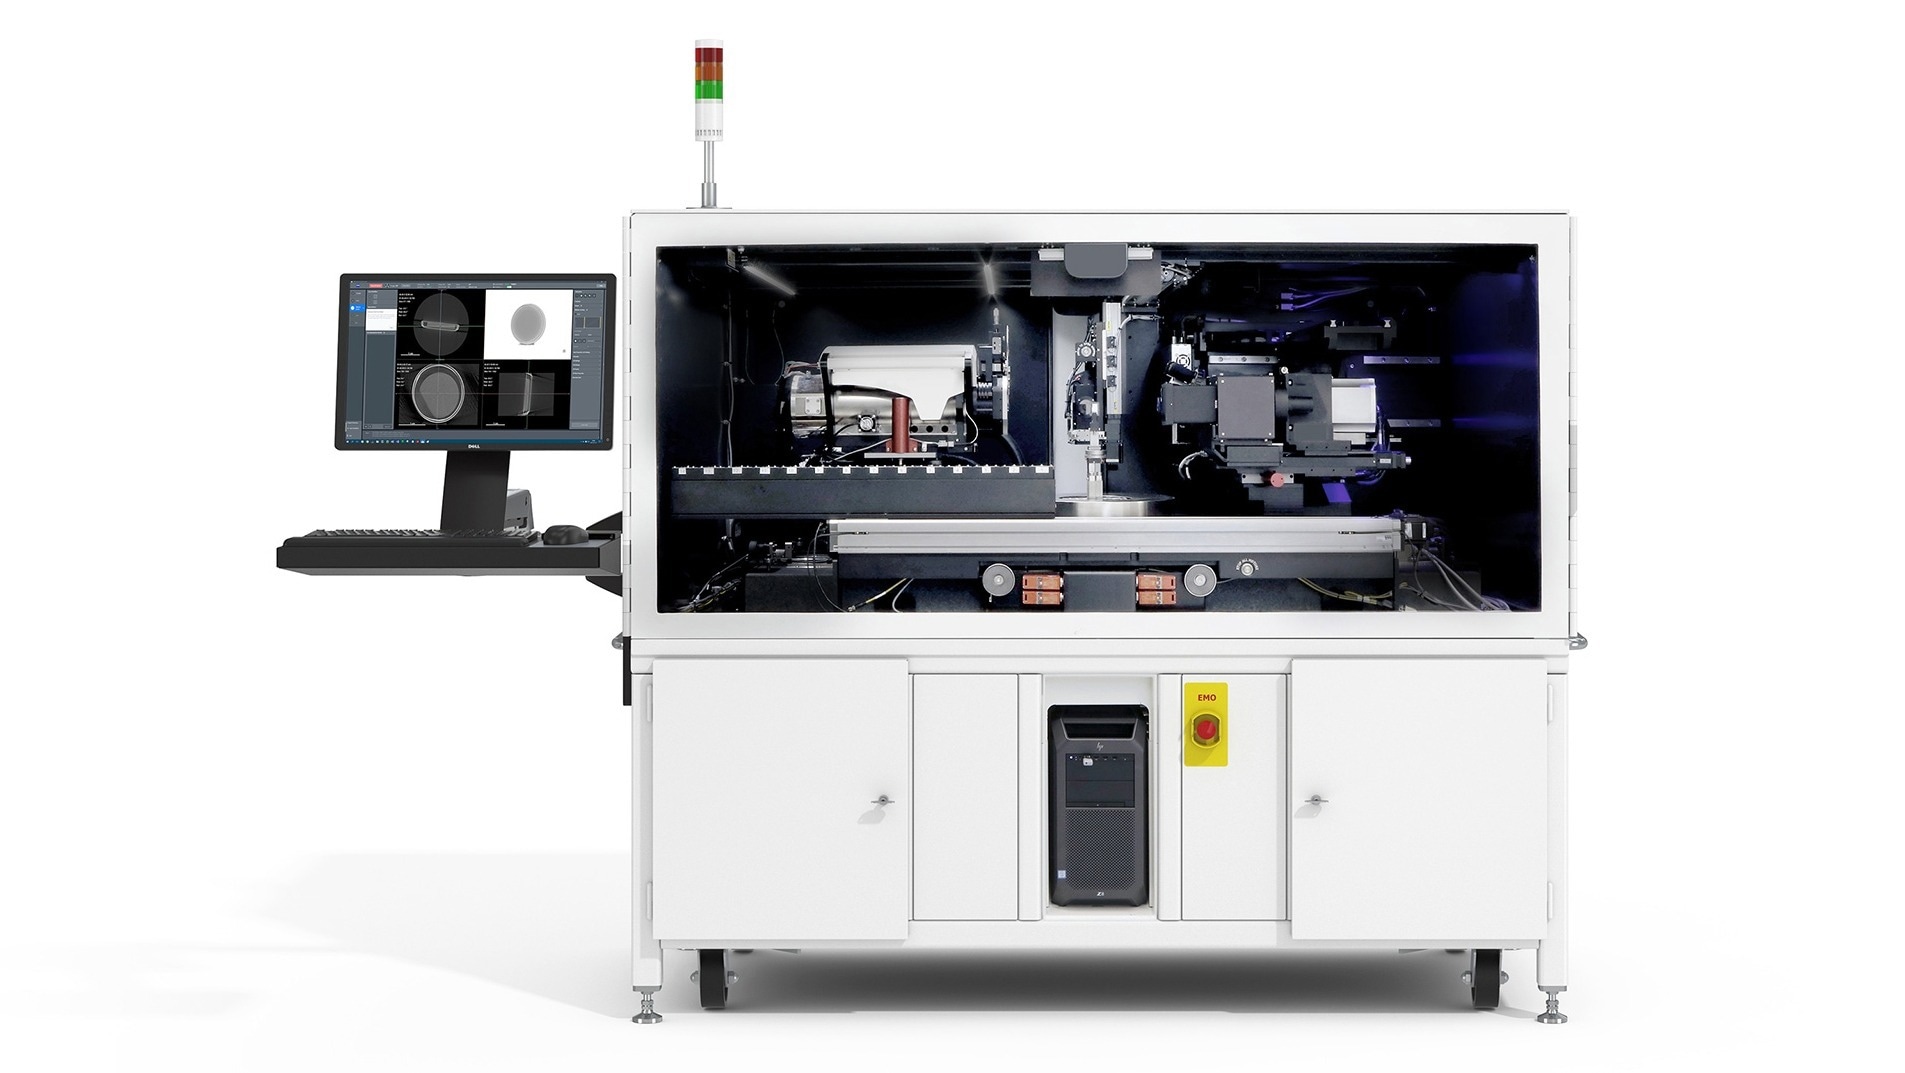 ZEISS Xradia 630 Versa introduces resolution performance for expanded research capabilities